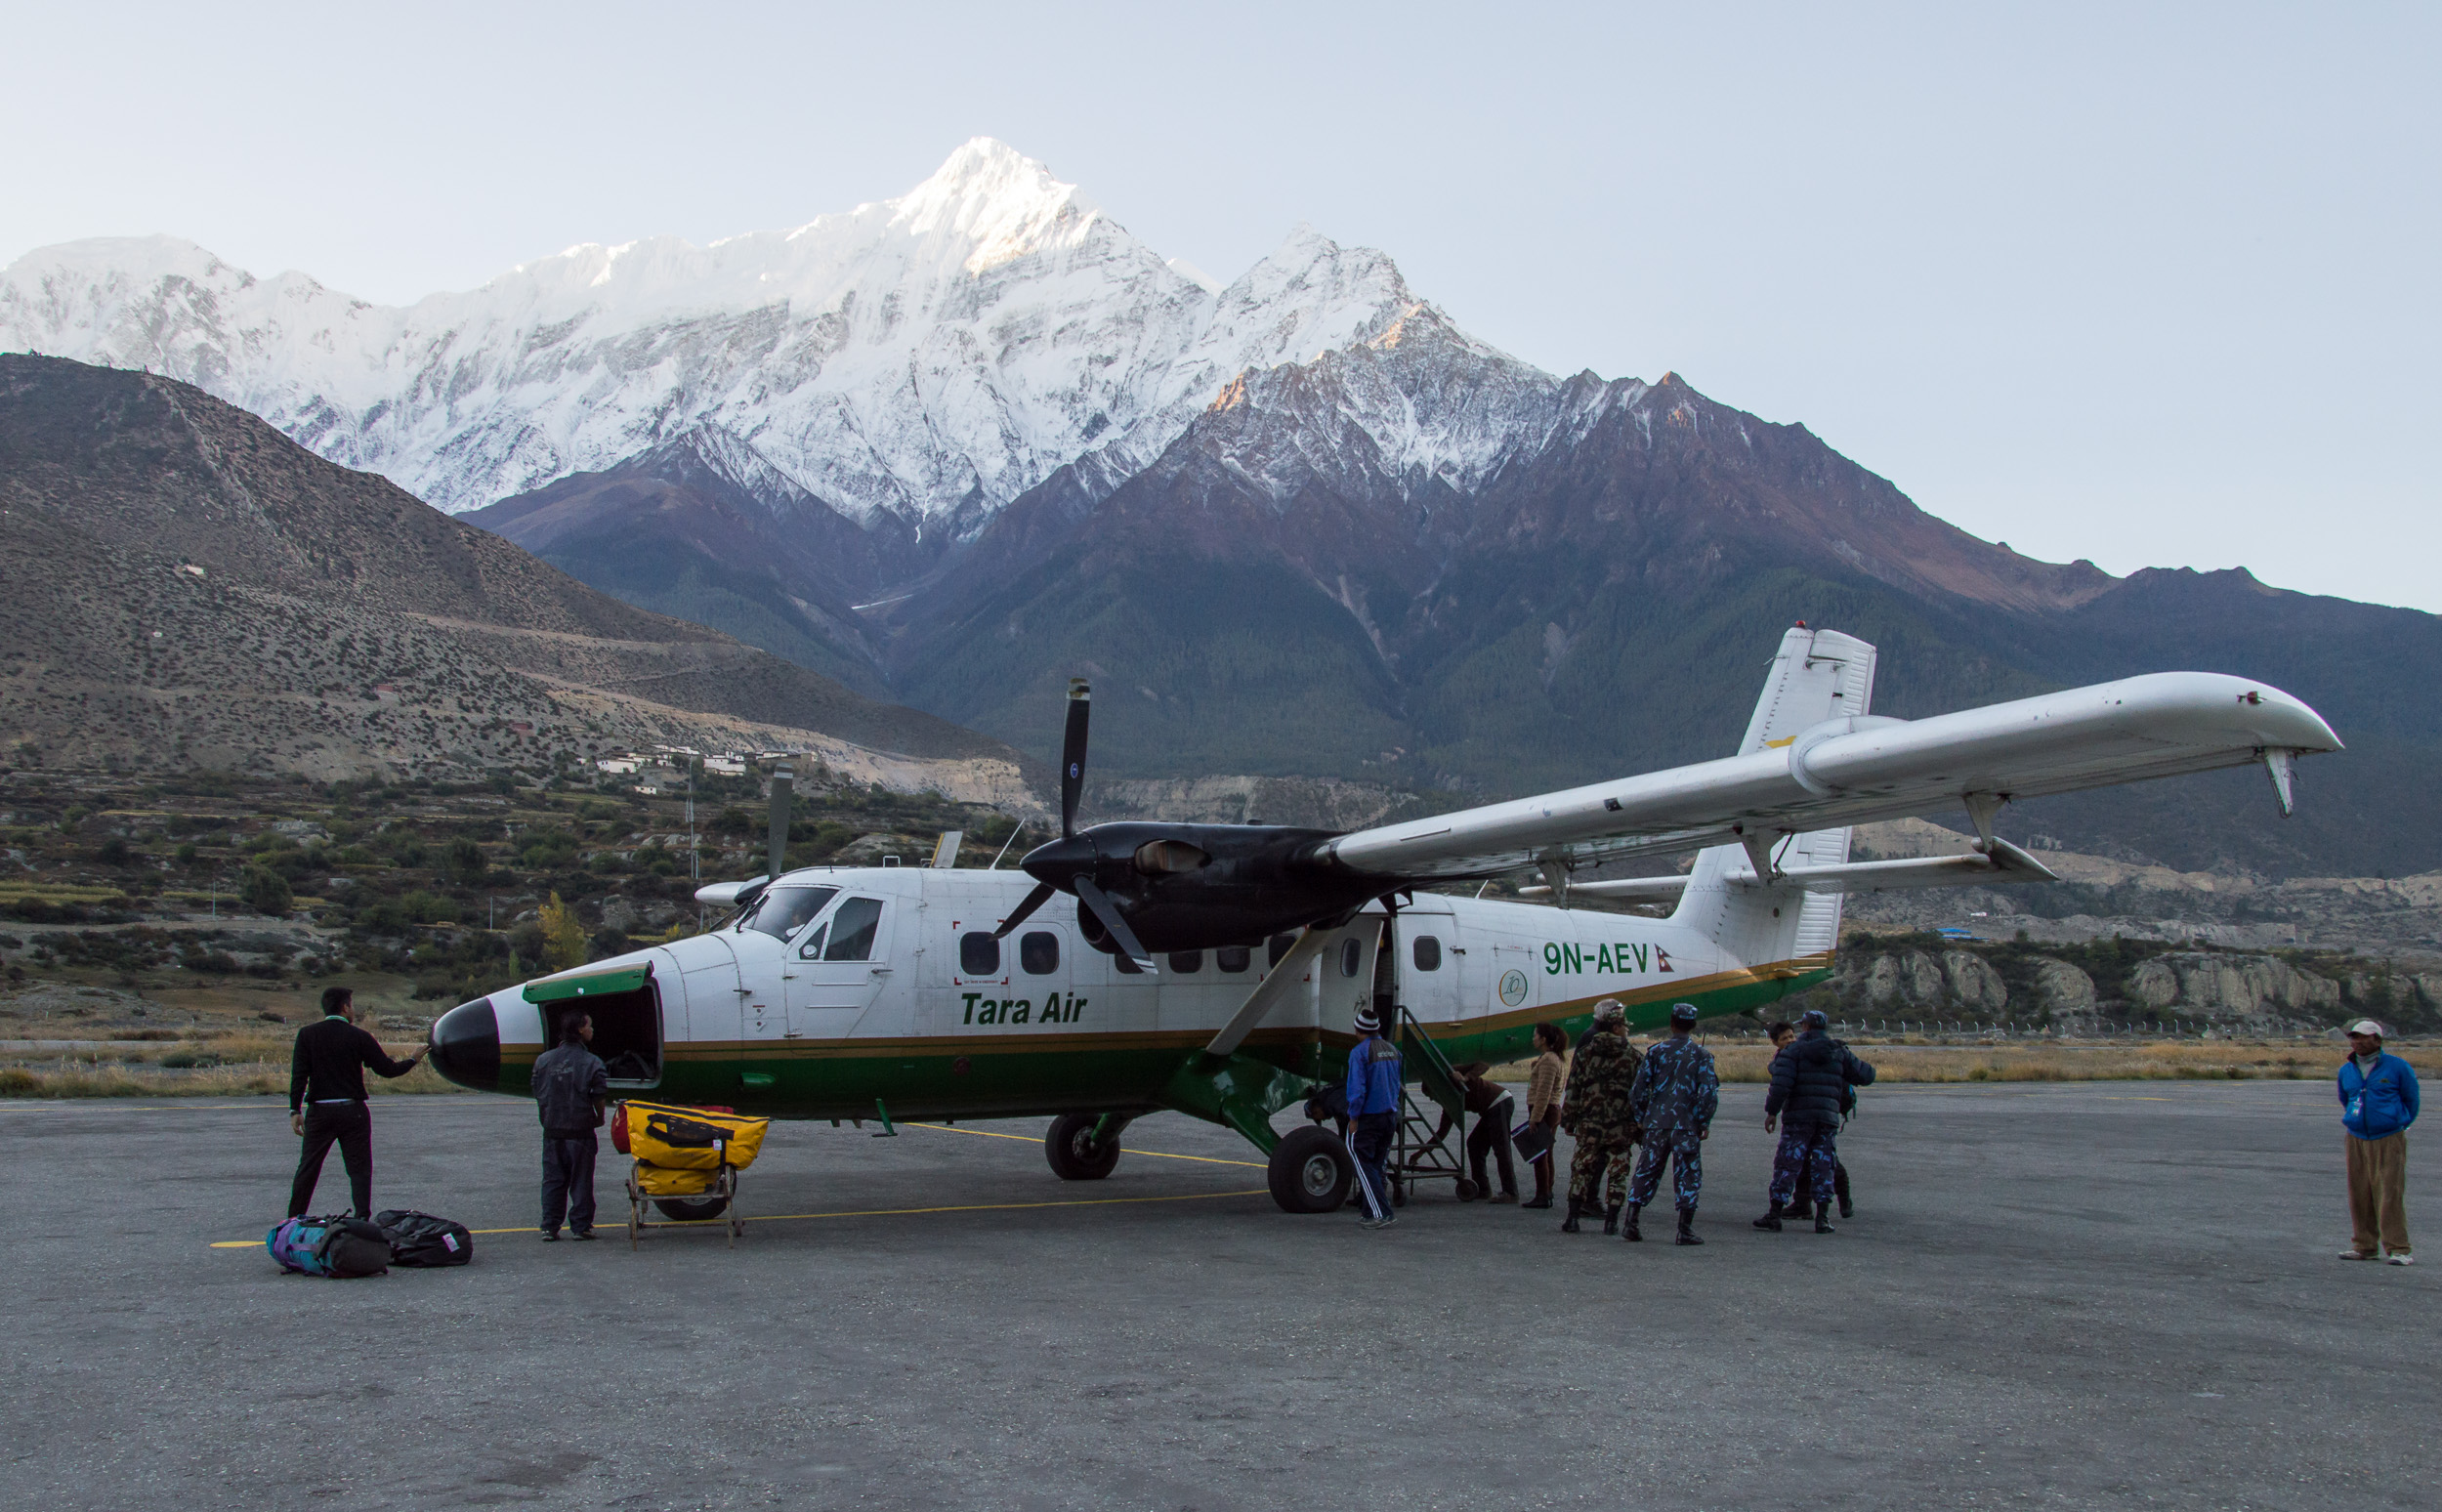 Tara Air DHC-6 Twin Otter 9N-AEV in Jomsom airport - not the plane involved in the crash, image: Solundir / Wikimedia